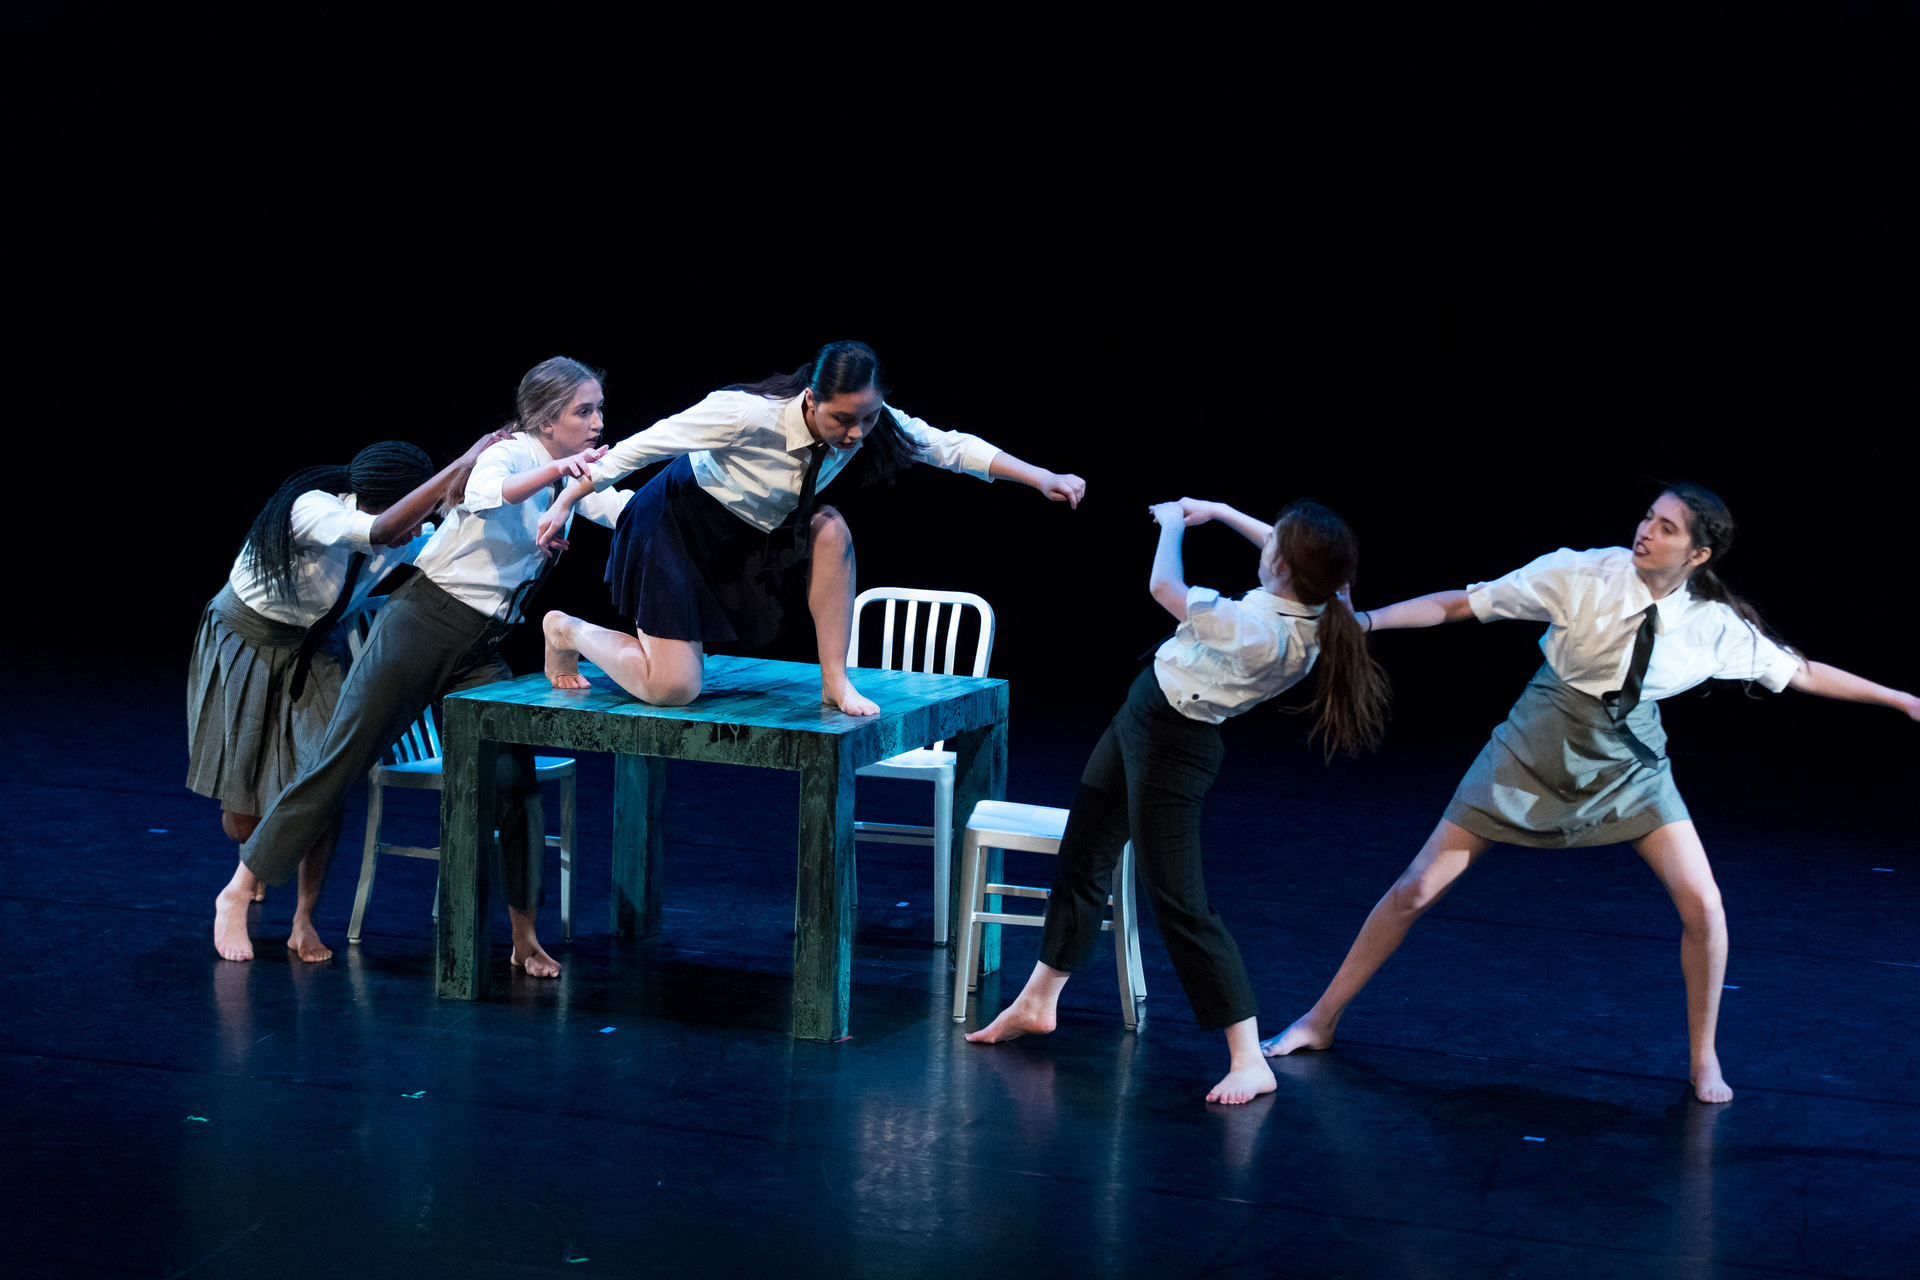 Dance students performing onstage